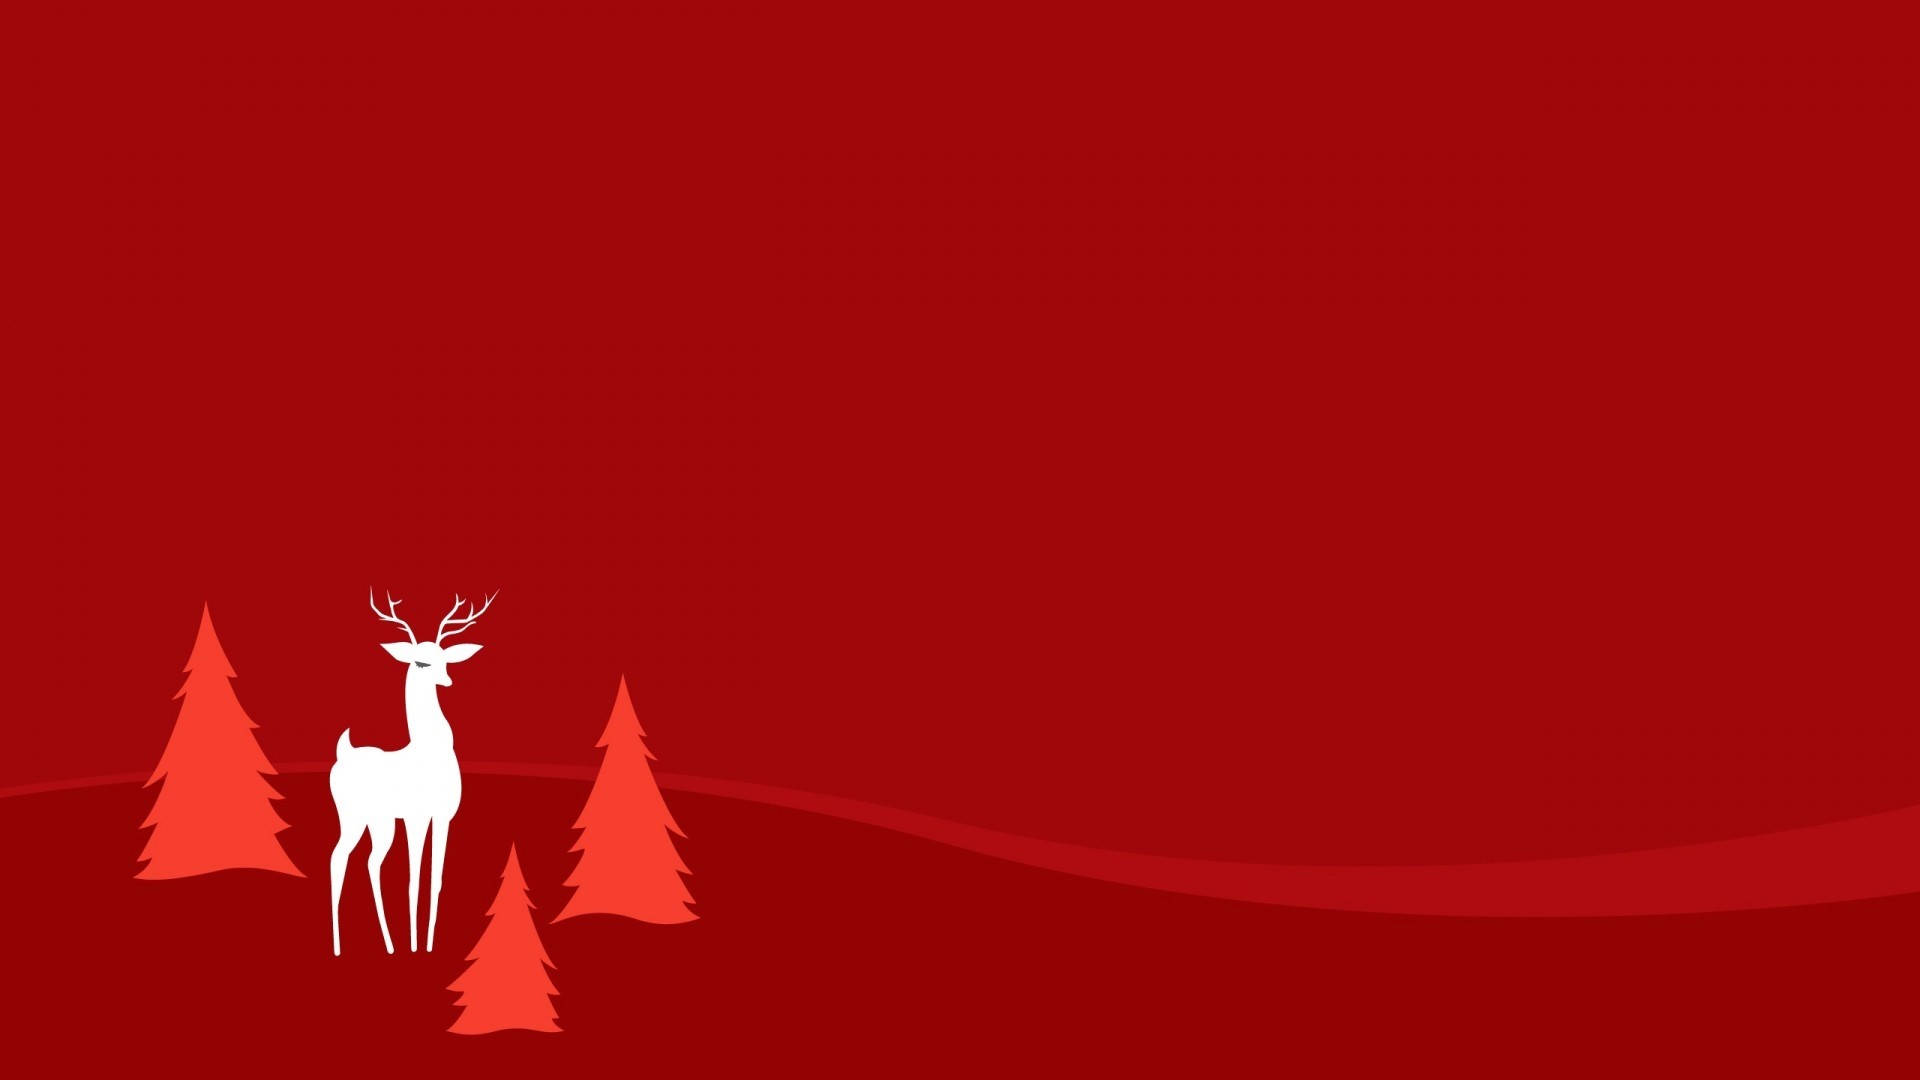 White Reindeer On Red Christmas Background Wallpaper